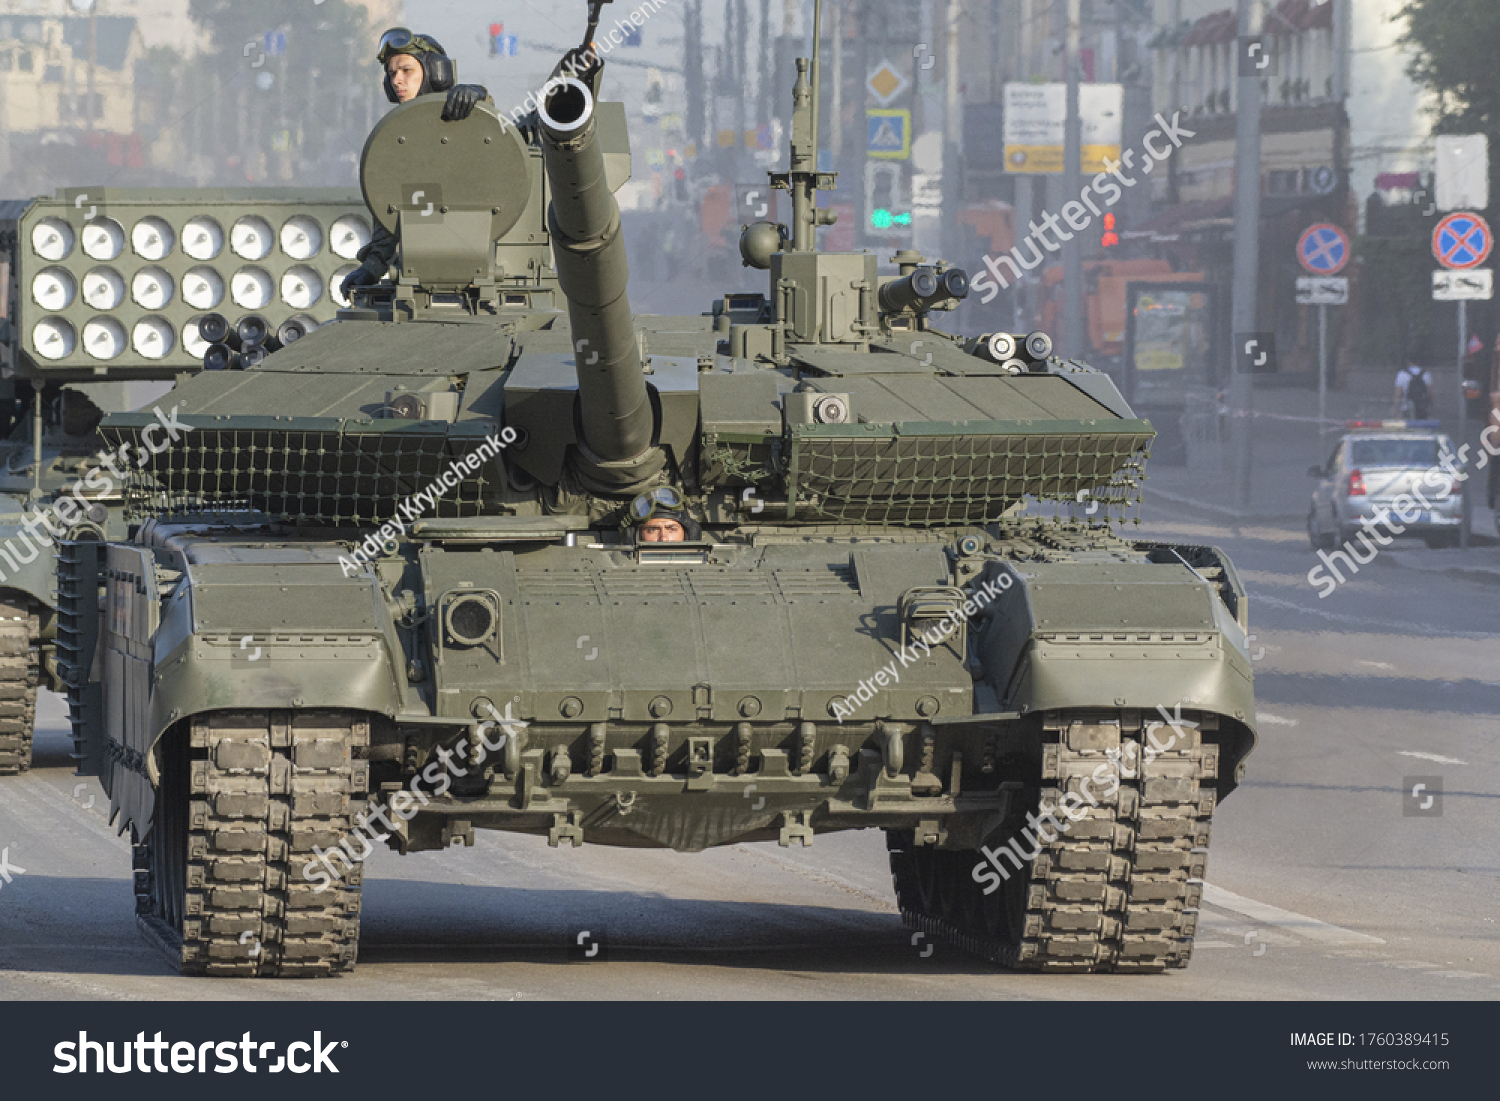 https://image.shutterstock.com/z/stock-photo-june-moscow-russia-the-t-m-tank-goes-to-red-square-to-participate-in-the-rehearsal-of-1760389415.jpg